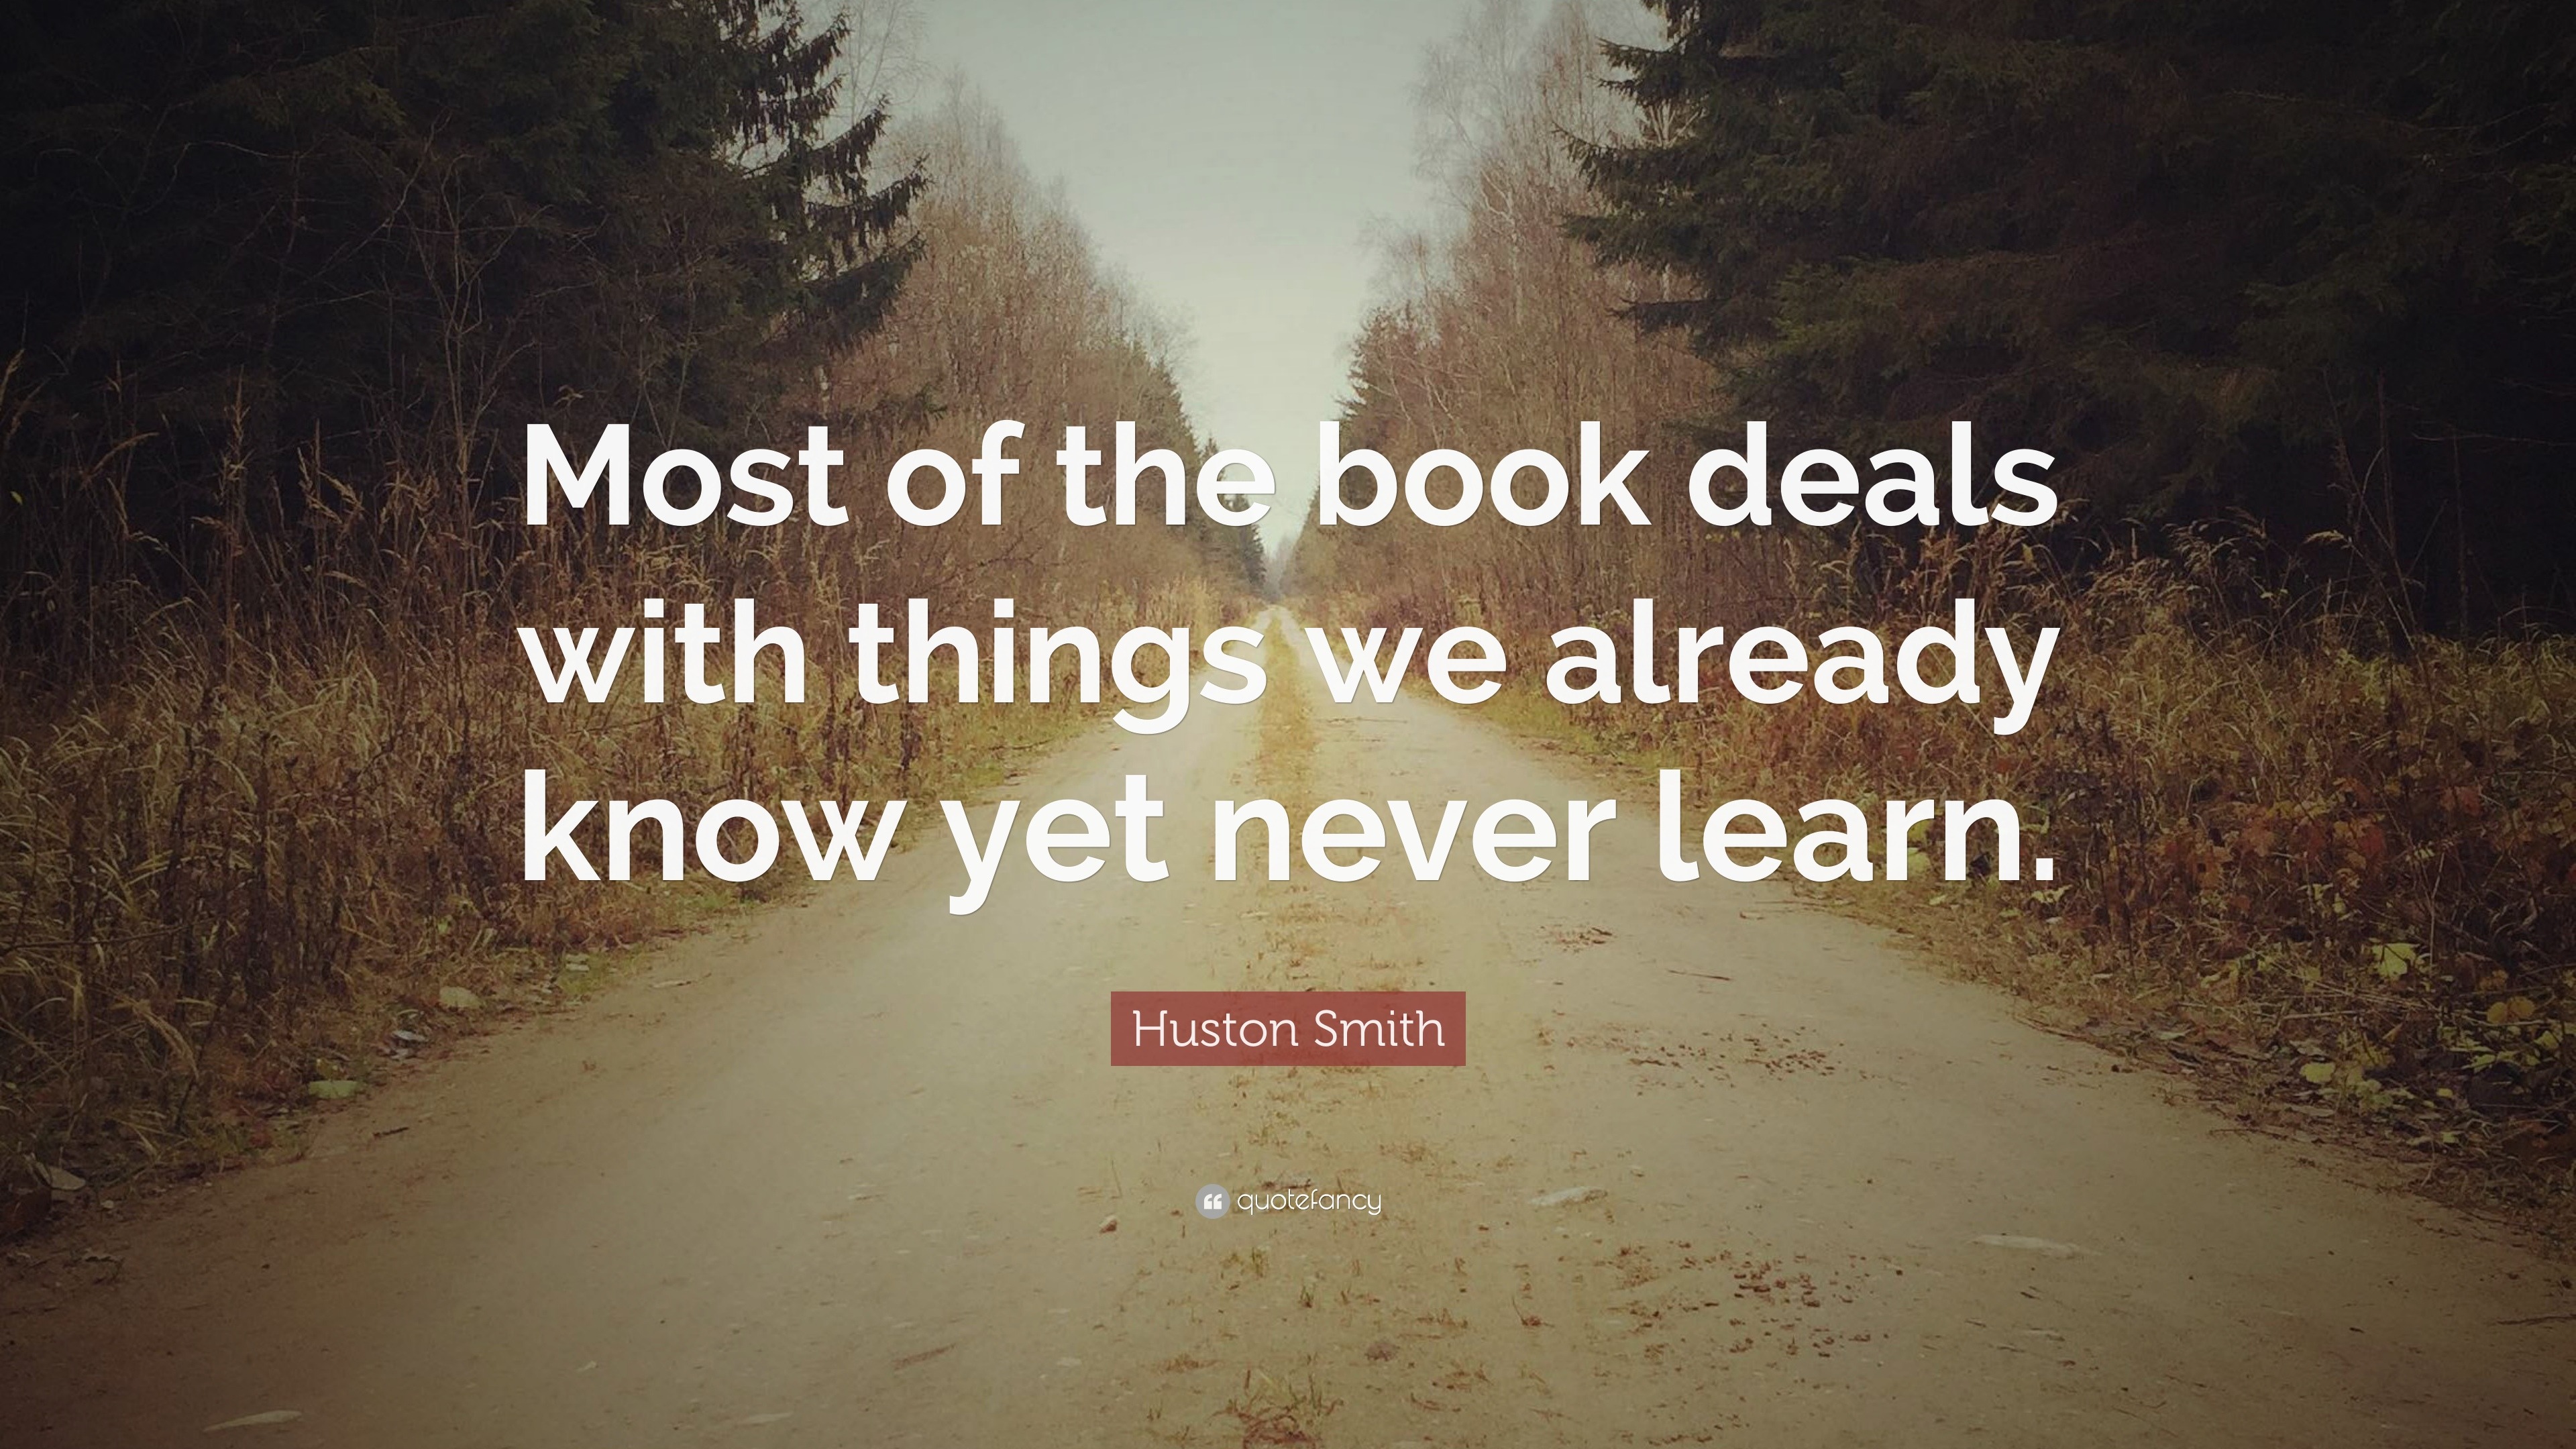 Huston Smith Quote: “Most of the book deals with things we already 